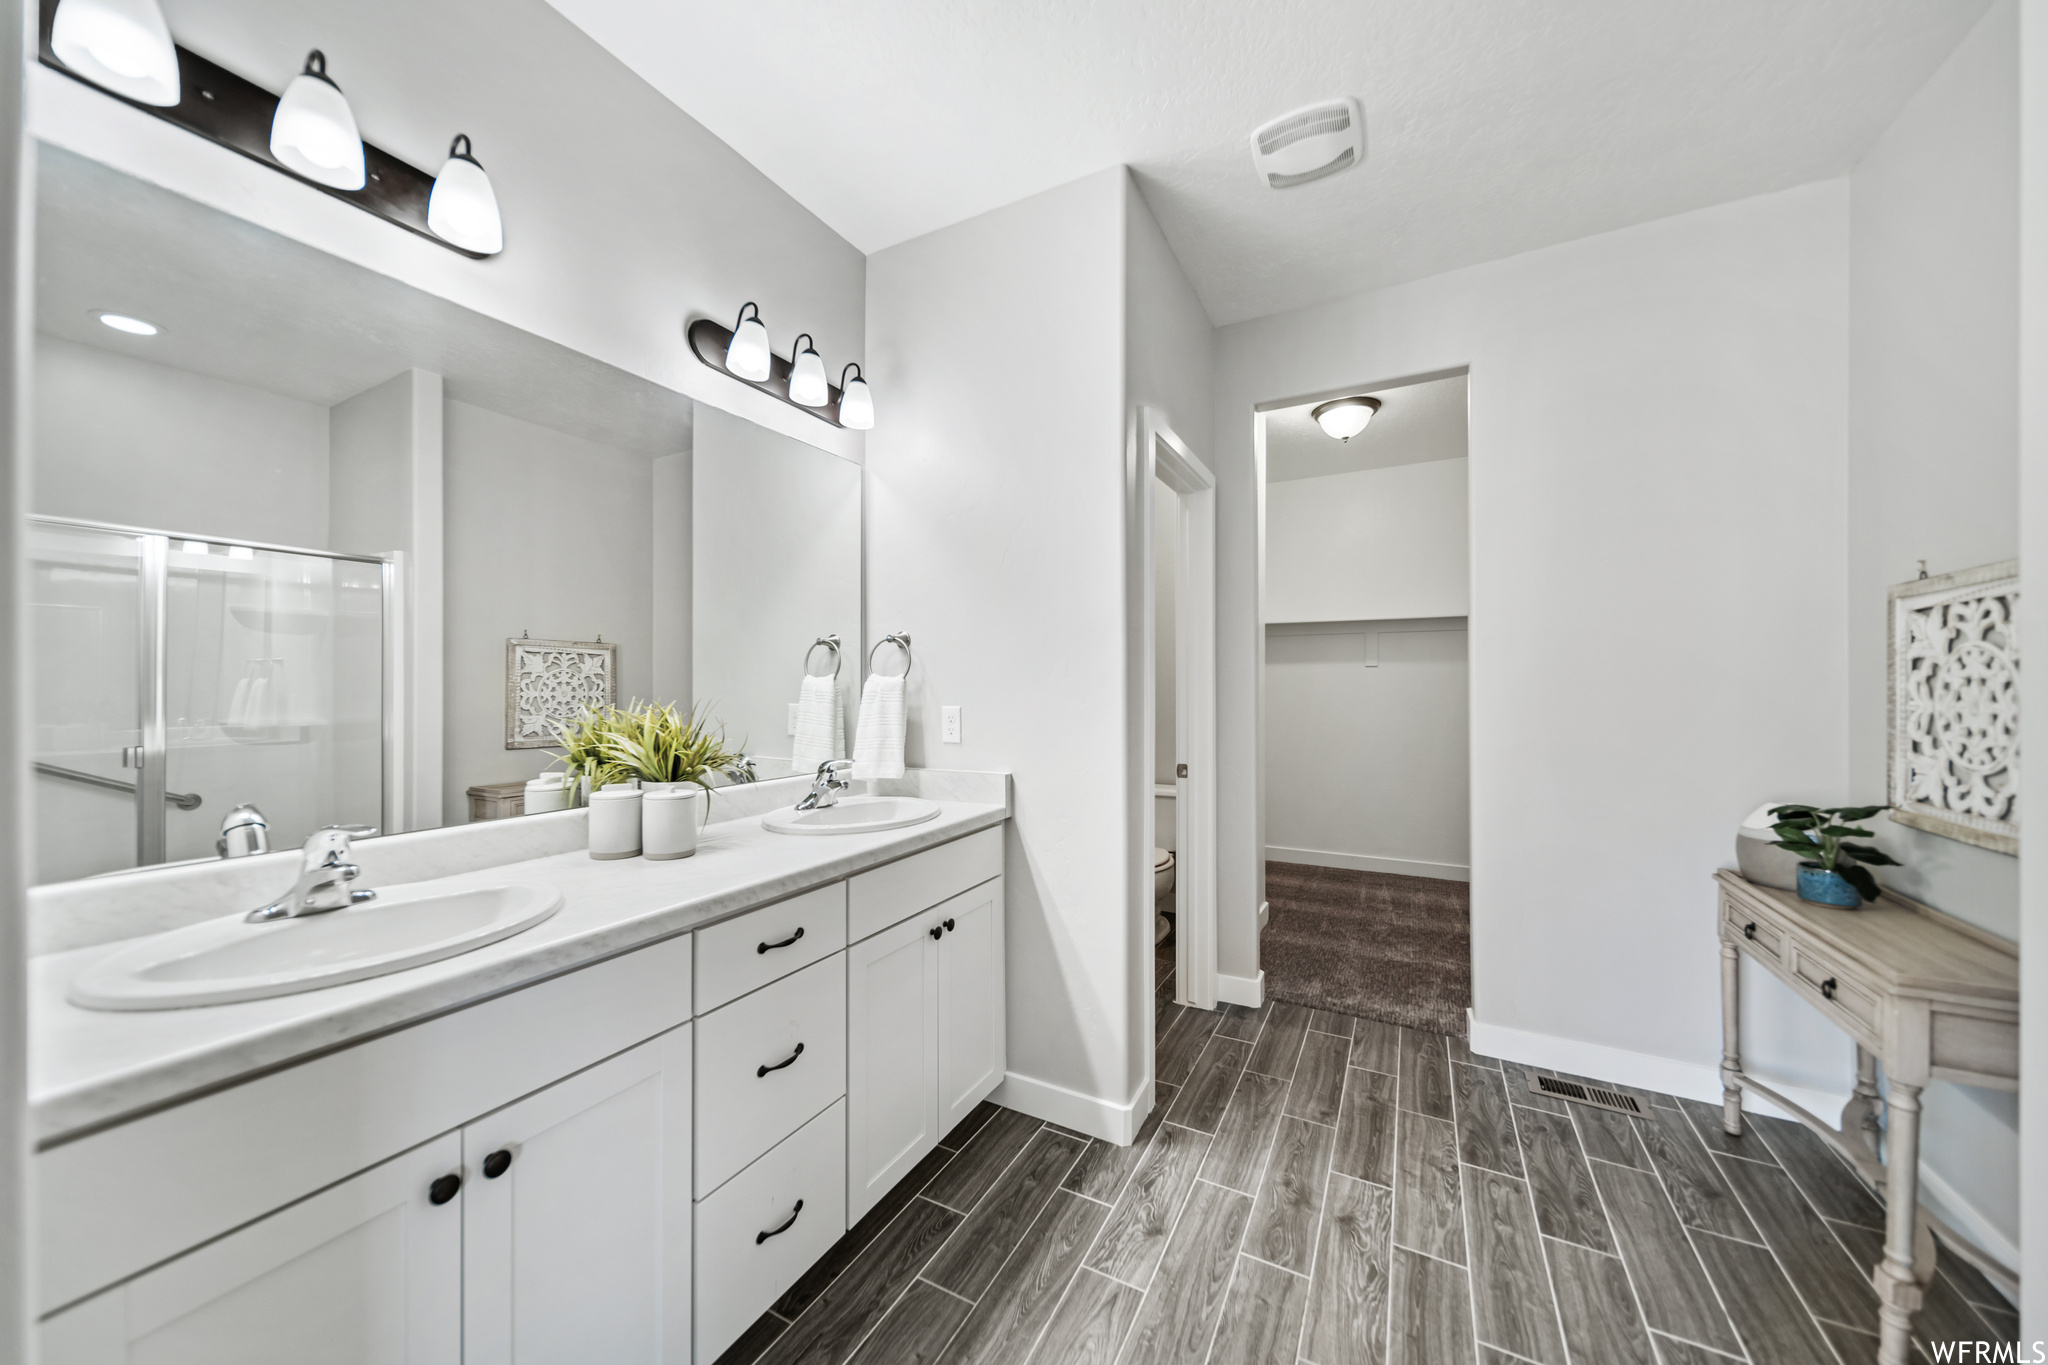 Primary bathroom with double vanity and oversized, walk-in closet